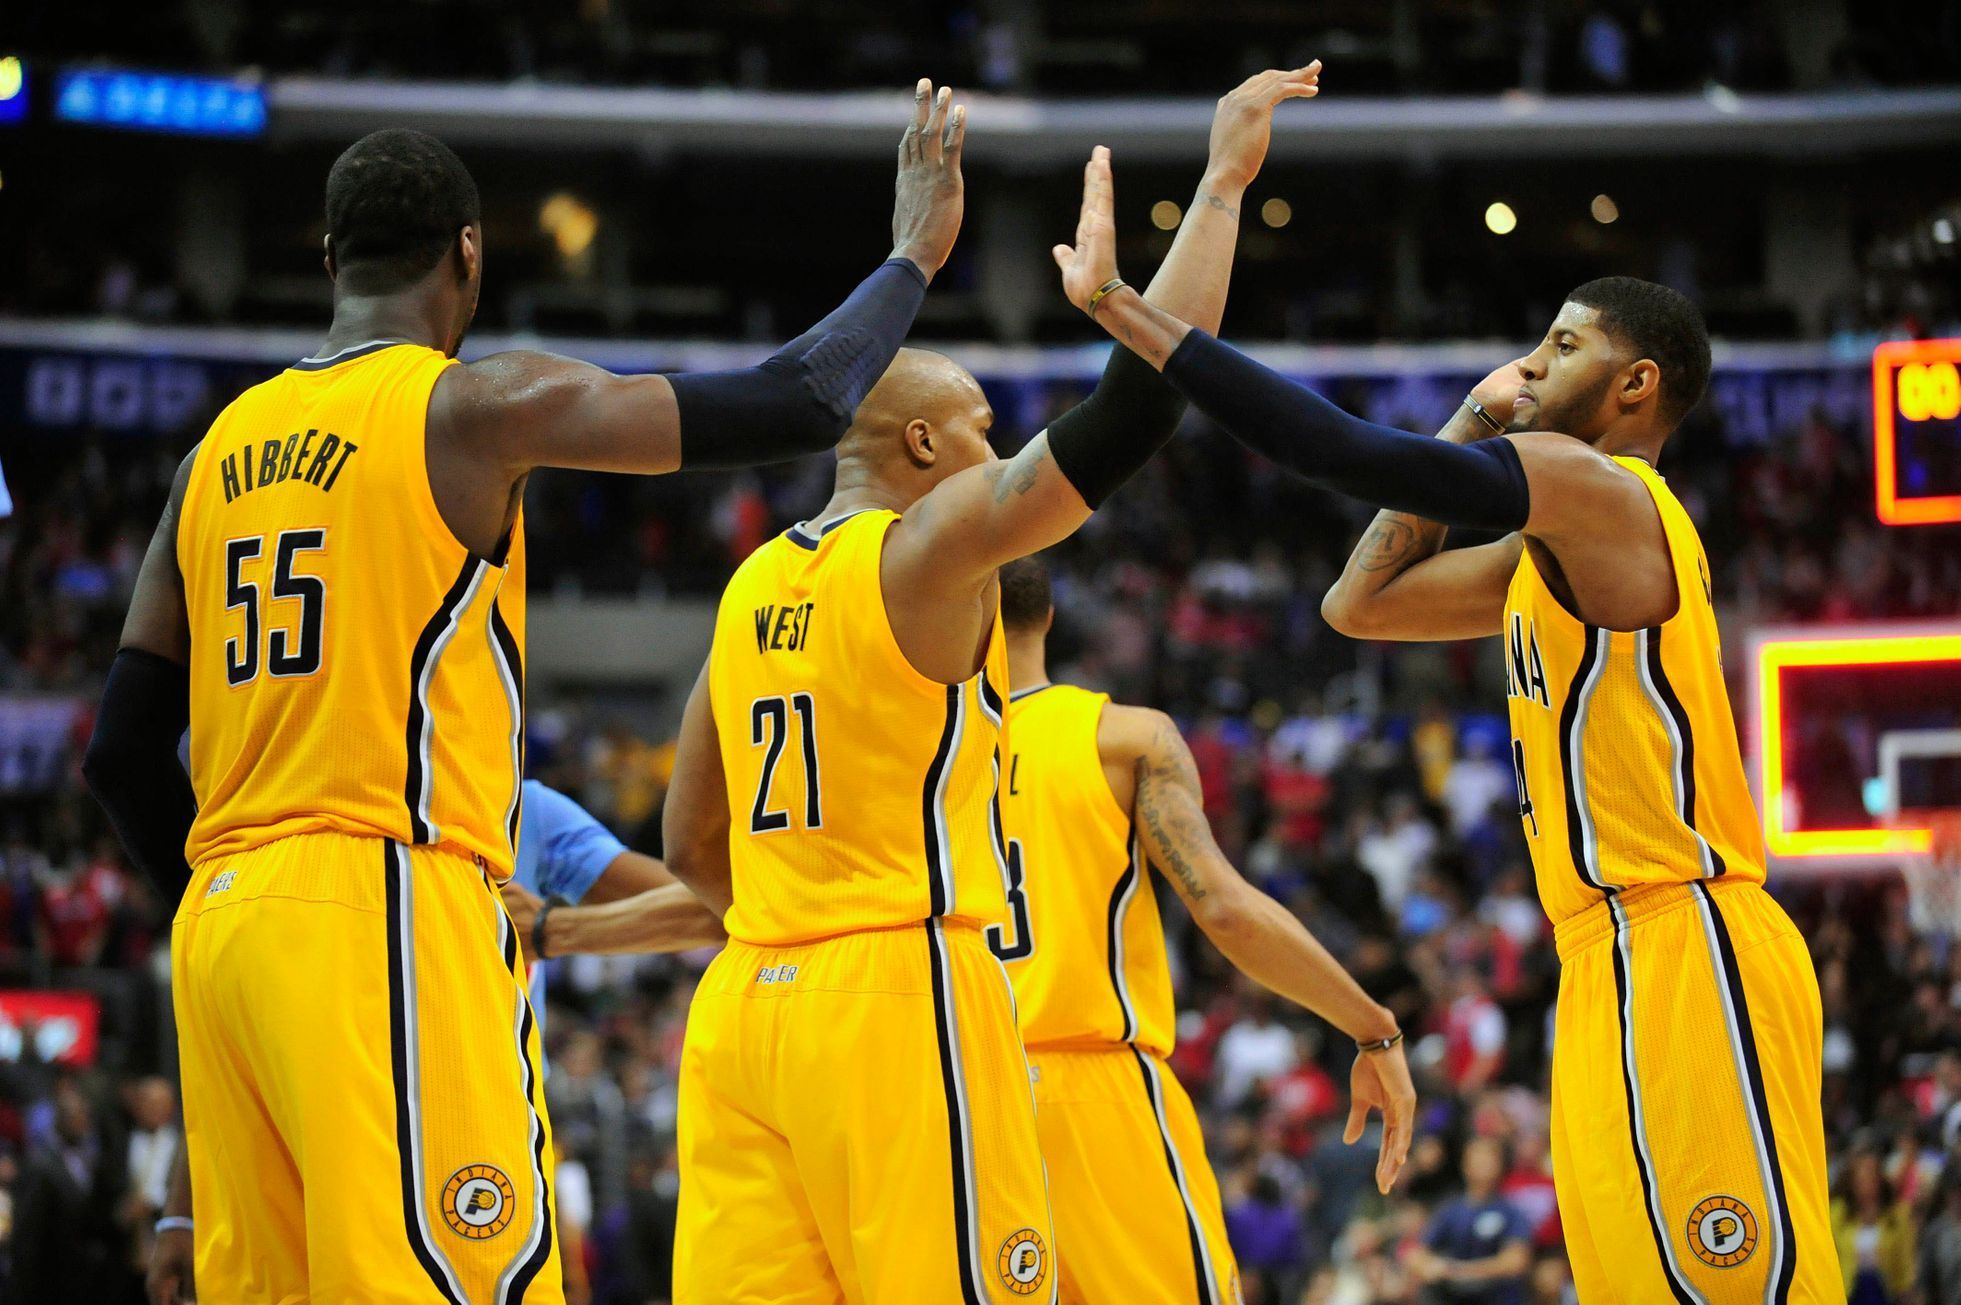 NBA: Indiana Pacers at Los Angeles Clippers (Hibbert, West, George)